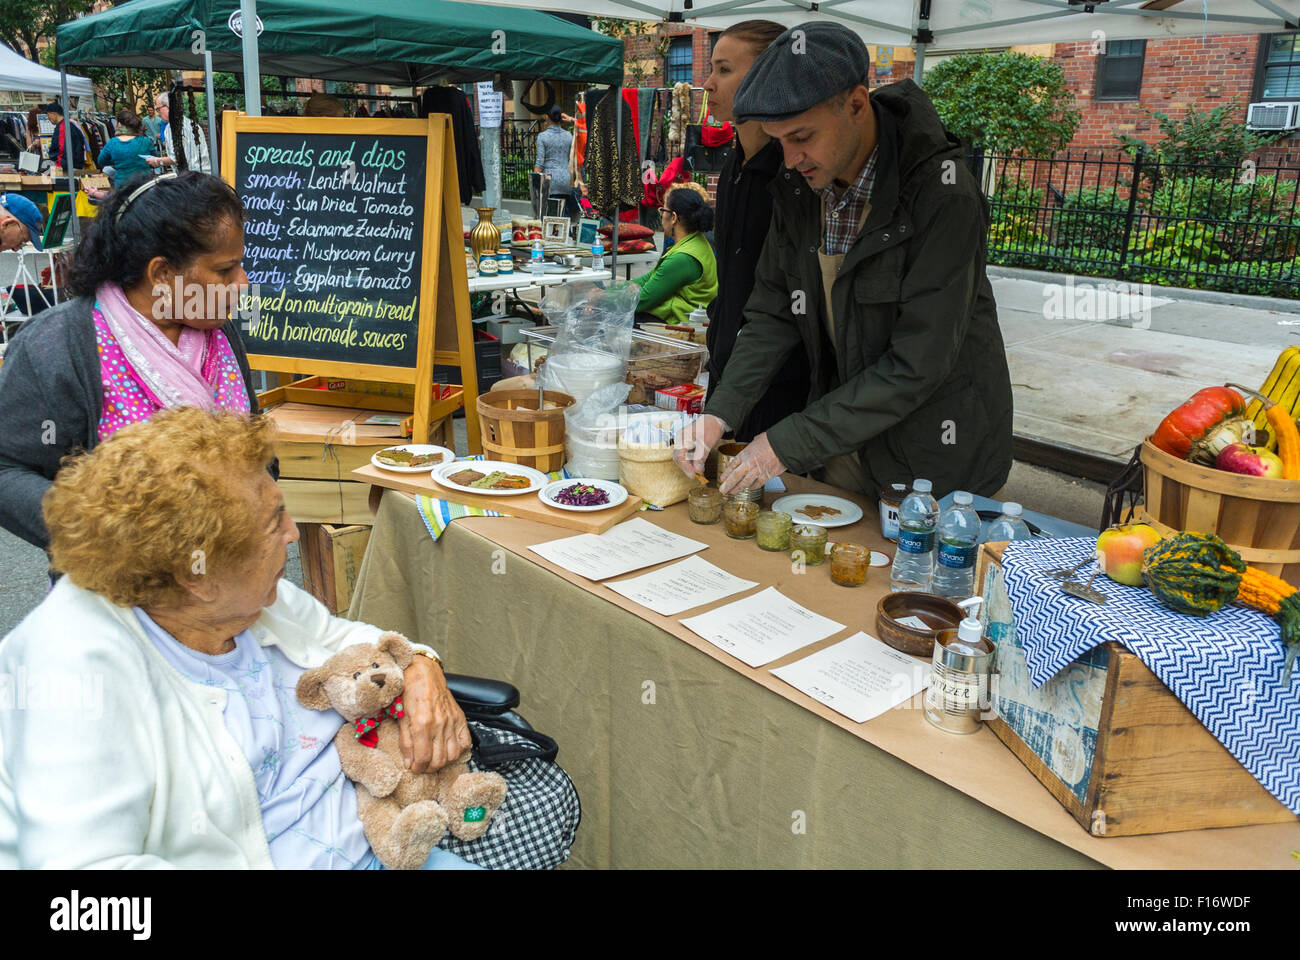 New York City, USA, Handicapped Senior Woman in Wheelchair, Shopping in Chelsea  Flea Market,  Street Food Vendor Stall 'Spreads and Dips' Stock Photo